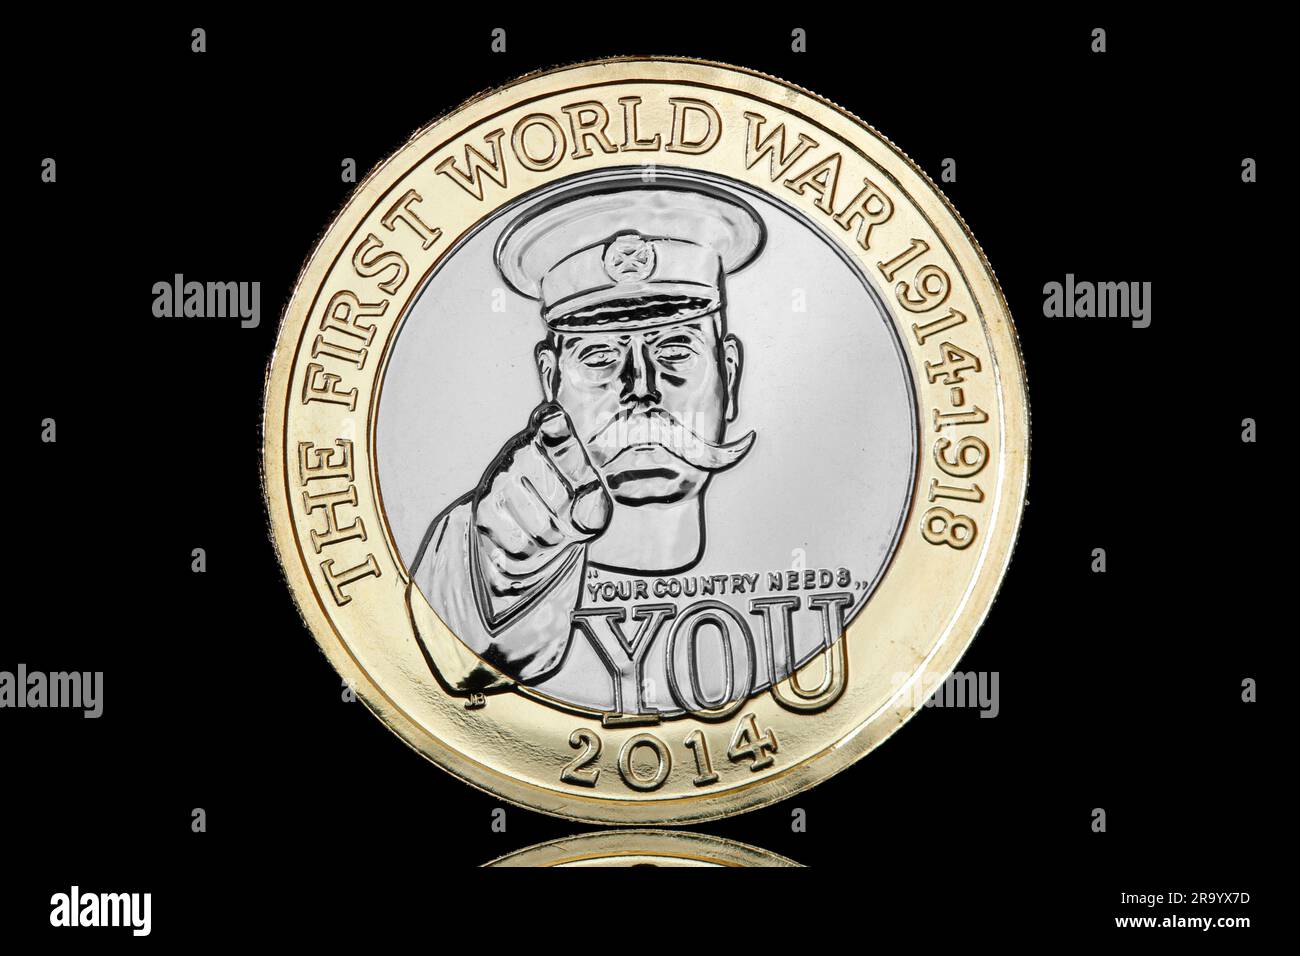 2014 UK £2 coin to commemorate 100th anniversary of the First World War.Design features the iconic image of Lord Kitchener pointing Stock Photo